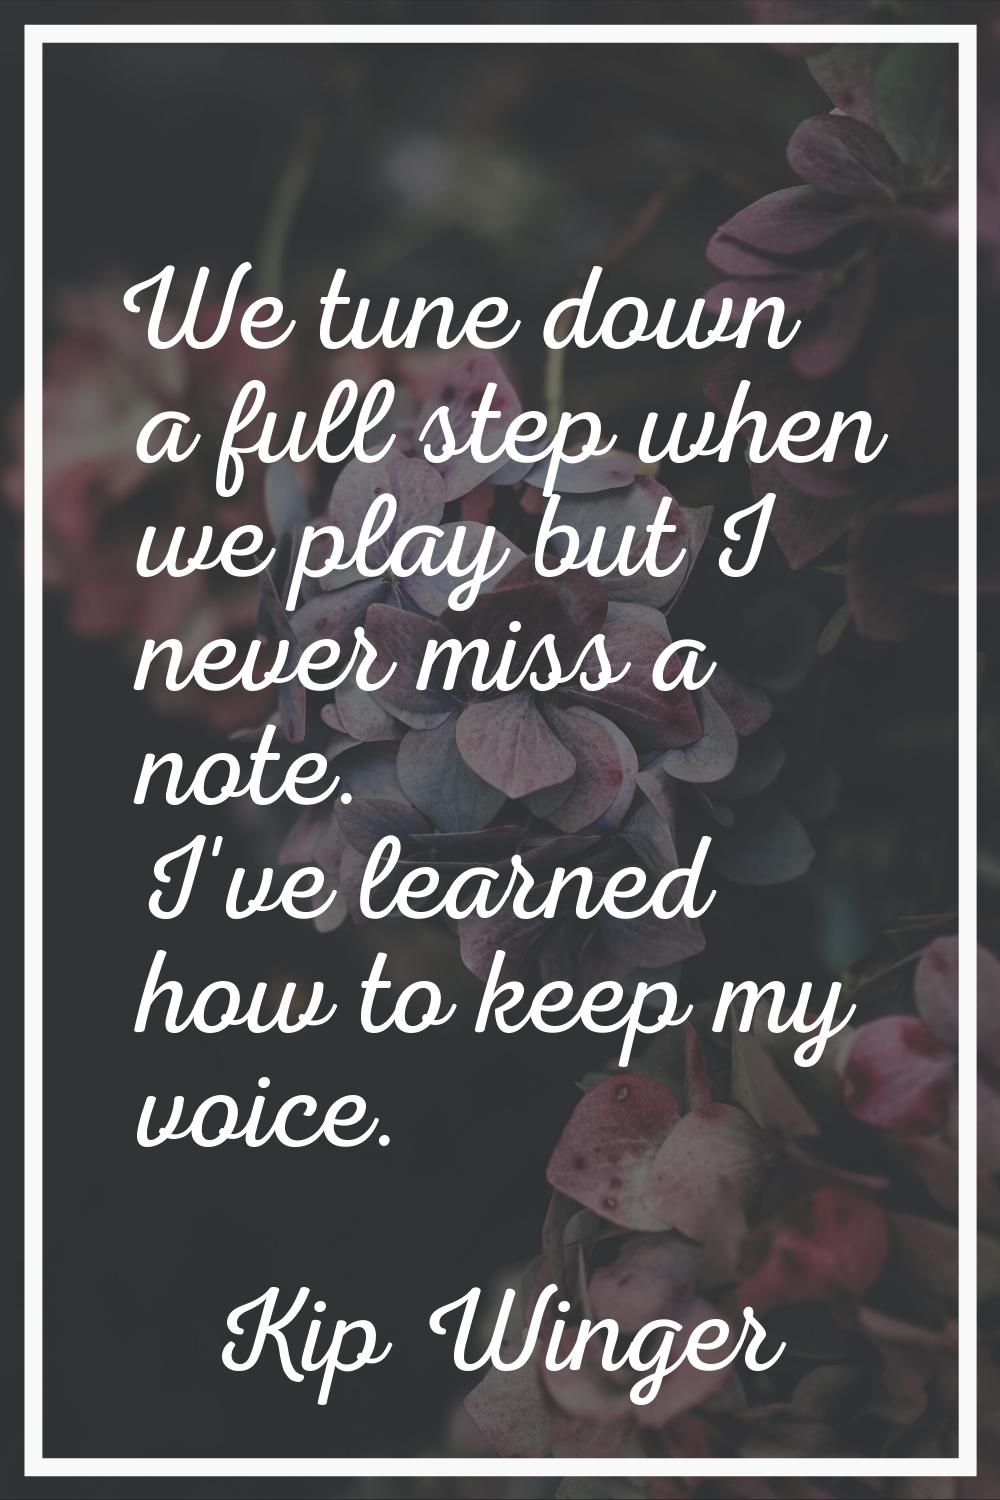 We tune down a full step when we play but I never miss a note. I've learned how to keep my voice.